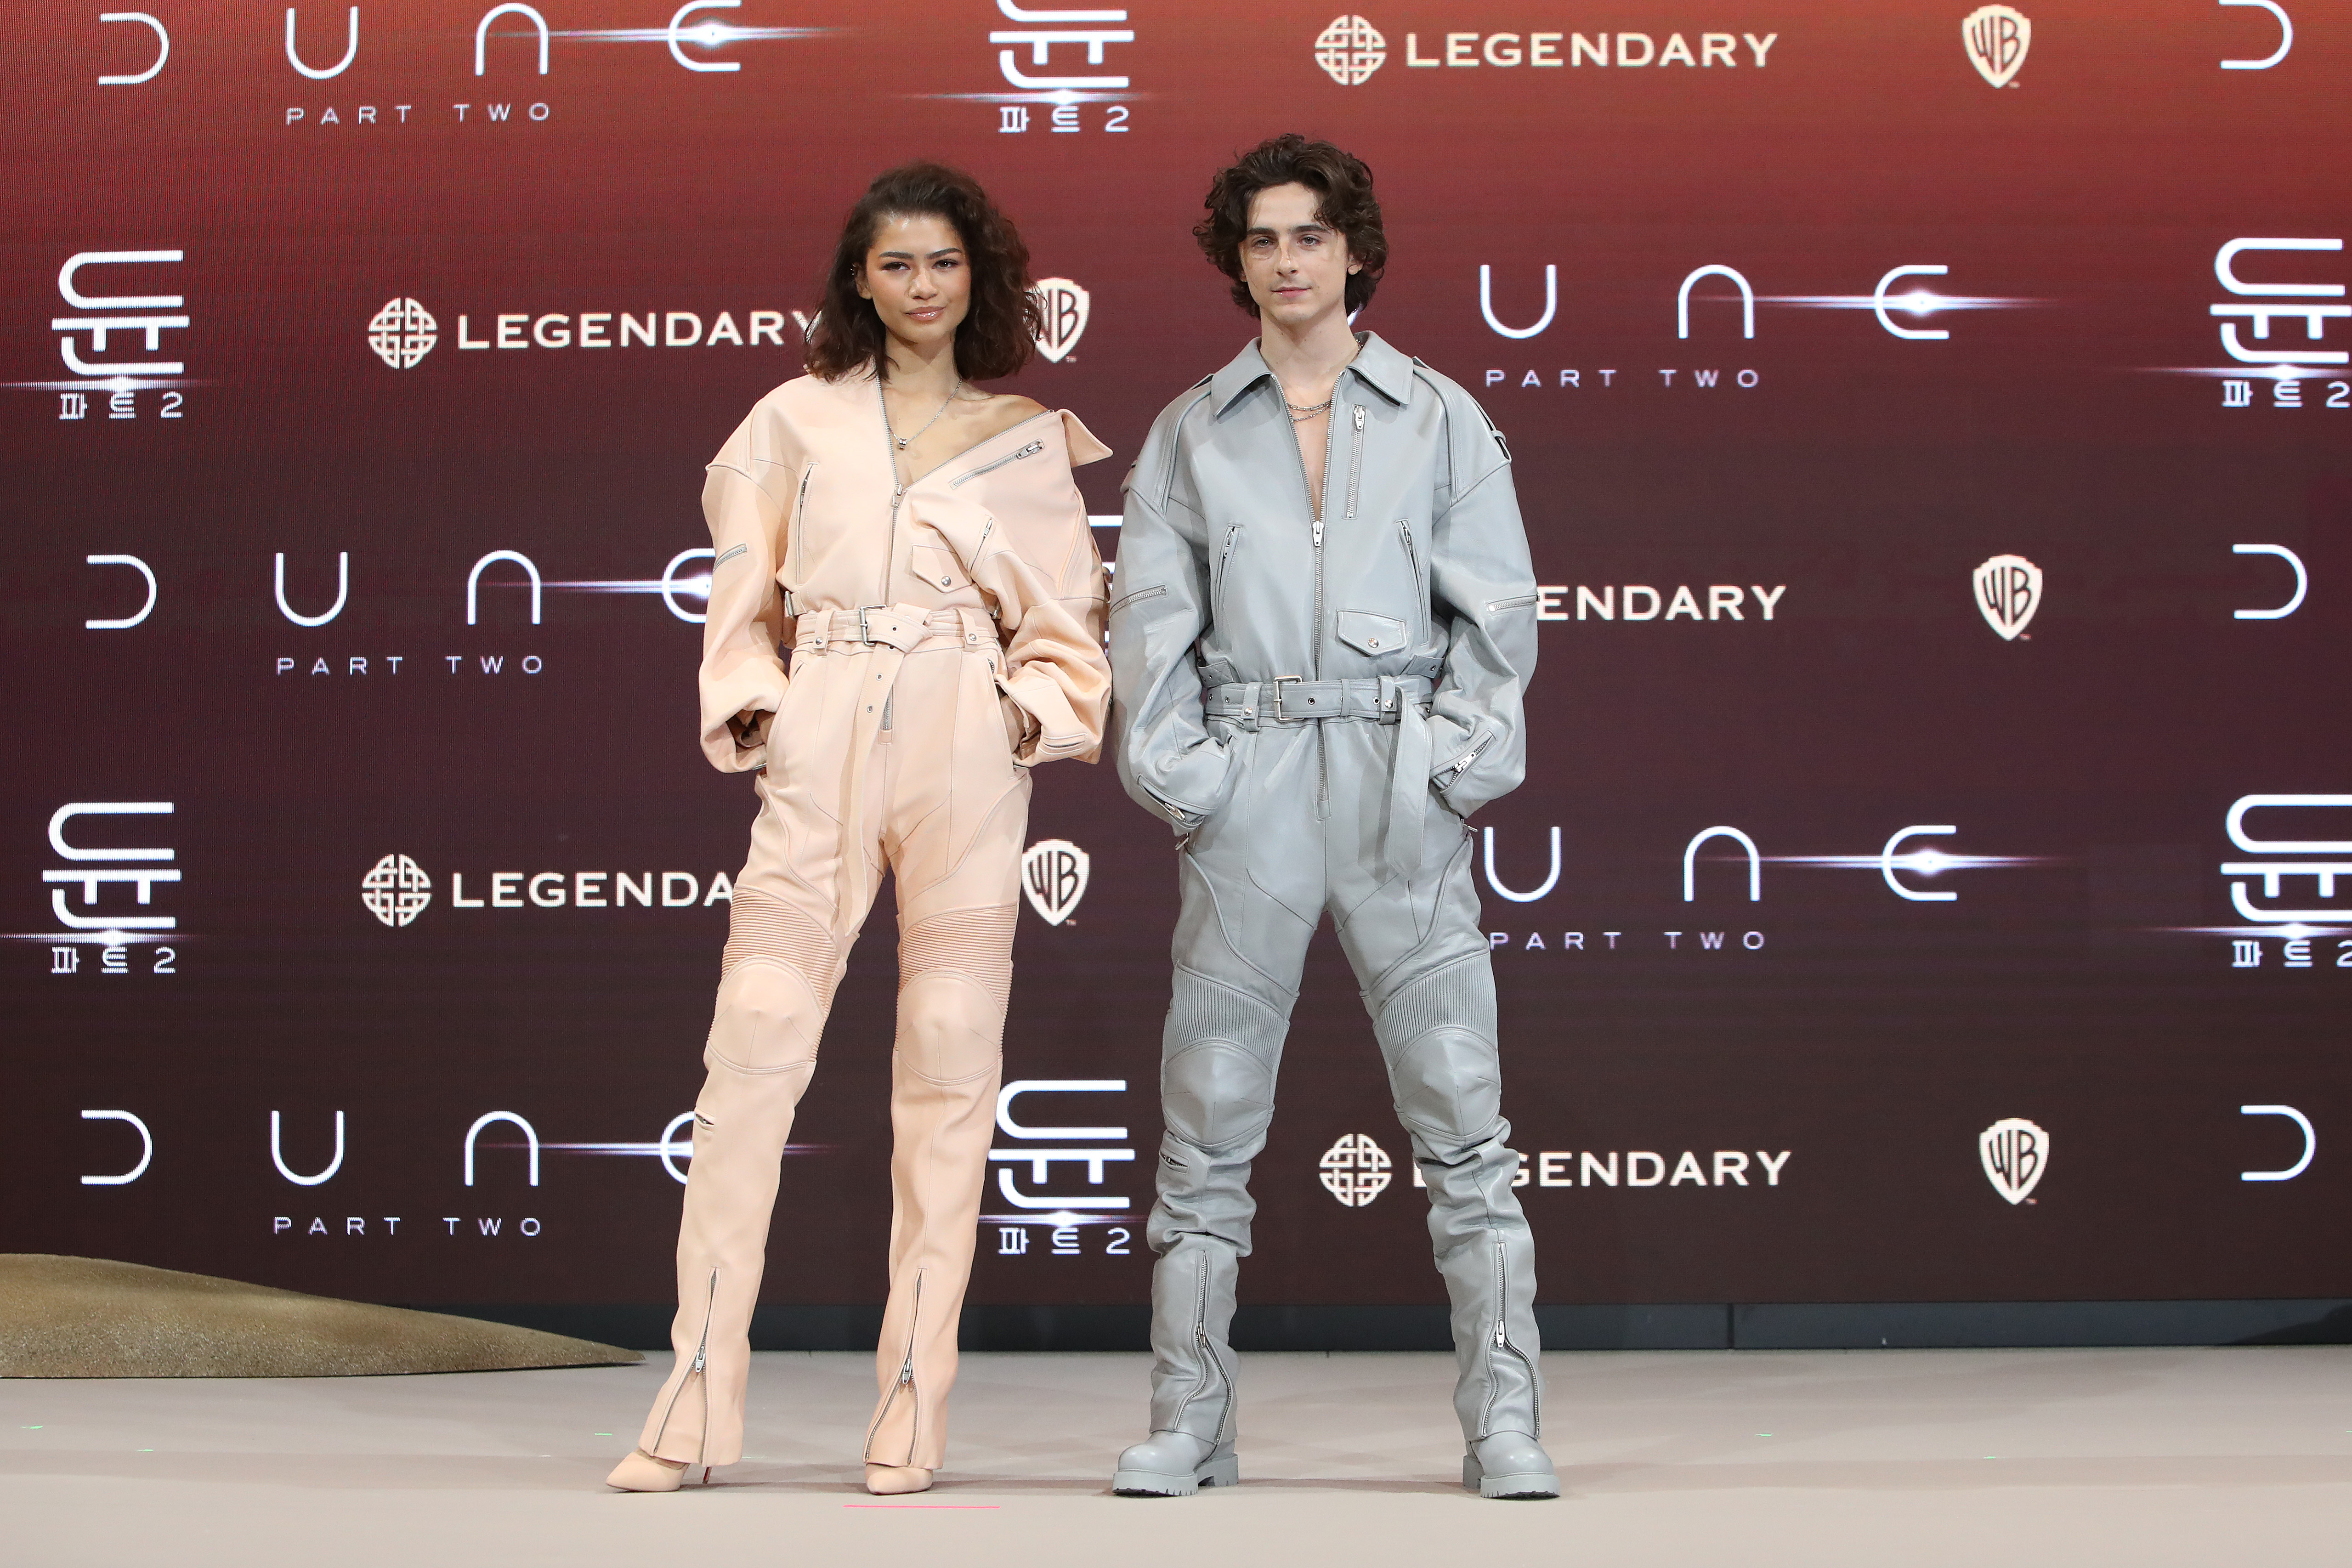 Zendaya and Timothee have been travelling the world to promote their new movie